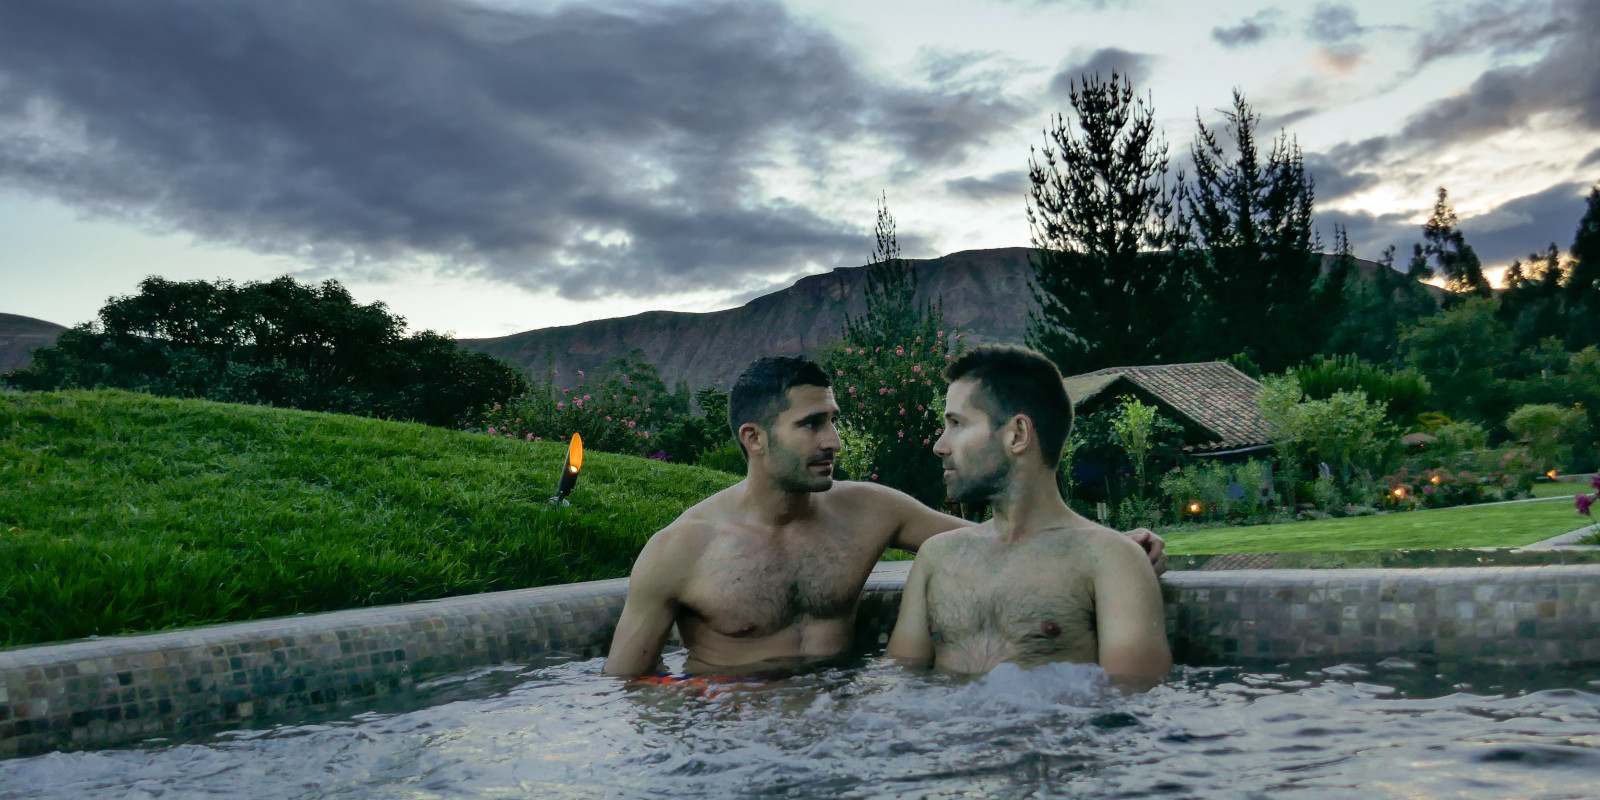 Sol Y luna is a beautiful gay friendly Relais et chateaux in the sacred valley of Peru